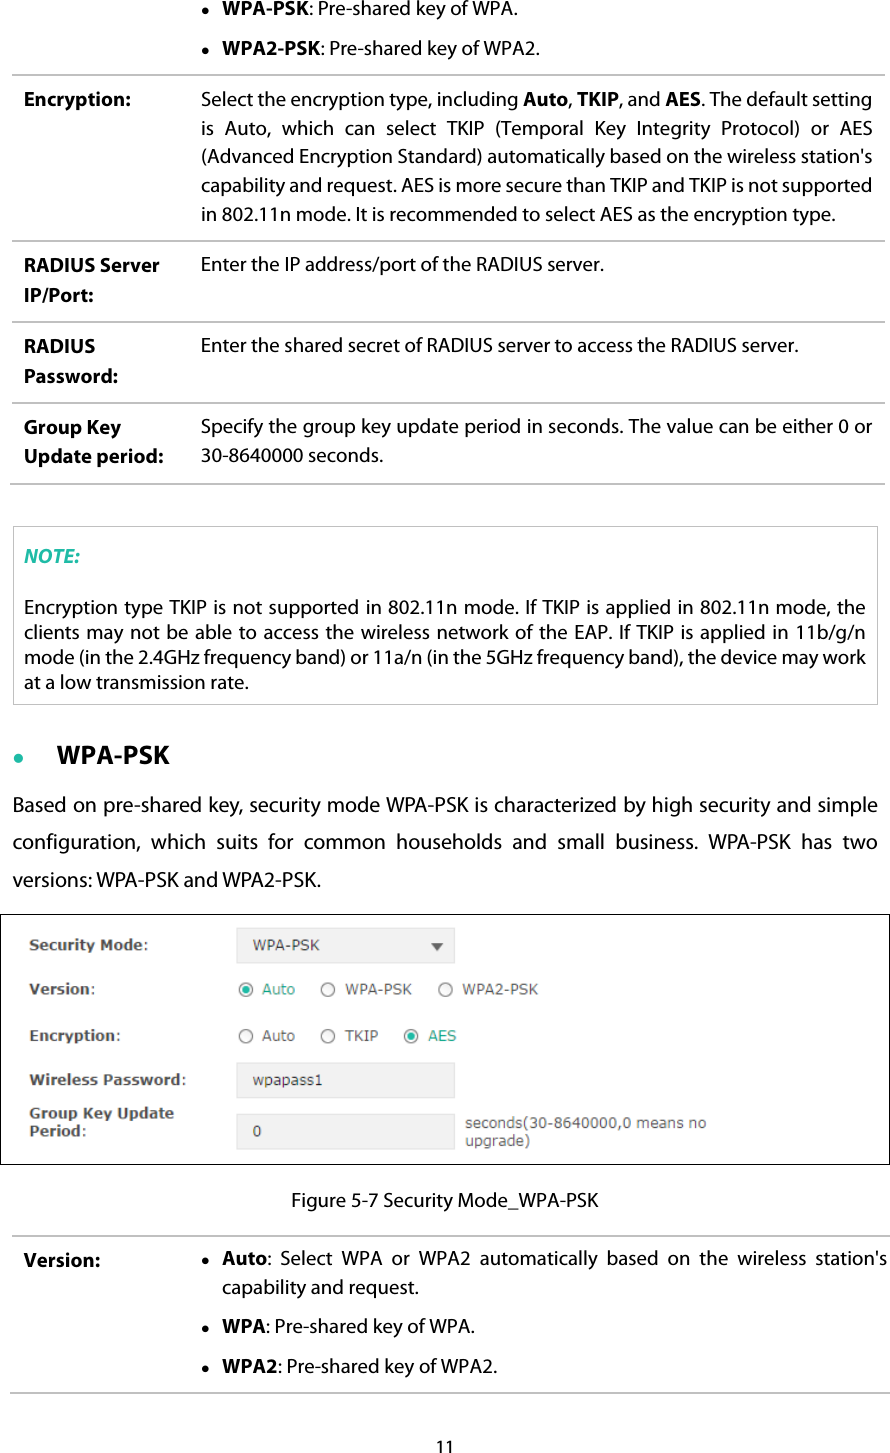  WPA-PSK: Pre-shared key of WPA.  WPA2-PSK: Pre-shared key of WPA2. Encryption:  Select the encryption type, including Auto, TKIP, and AES. The default setting is Auto, which can select TKIP (Temporal Key Integrity Protocol) or AES (Advanced Encryption Standard) automatically based on the wireless station&apos;s capability and request. AES is more secure than TKIP and TKIP is not supported in 802.11n mode. It is recommended to select AES as the encryption type. RADIUS Server IP/Port: Enter the IP address/port of the RADIUS server. RADIUS Password: Enter the shared secret of RADIUS server to access the RADIUS server. Group Key Update period: Specify the group key update period in seconds. The value can be either 0 or 30-8640000 seconds.  NOTE: Encryption type TKIP is not supported in 802.11n mode. If TKIP is applied in 802.11n mode, the clients may not be able to access the wireless network of the EAP. If TKIP is applied in 11b/g/n mode (in the 2.4GHz frequency band) or 11a/n (in the 5GHz frequency band), the device may work at a low transmission rate.  WPA-PSK Based on pre-shared key, security mode WPA-PSK is characterized by high security and simple configuration, which suits for common households and small business. WPA-PSK has two versions: WPA-PSK and WPA2-PSK.  Figure 5-7 Security Mode_WPA-PSK Version:   Auto:  Select WPA or WPA2 automatically based on the wireless station&apos;s capability and request.  WPA: Pre-shared key of WPA.  WPA2: Pre-shared key of WPA2. 11  